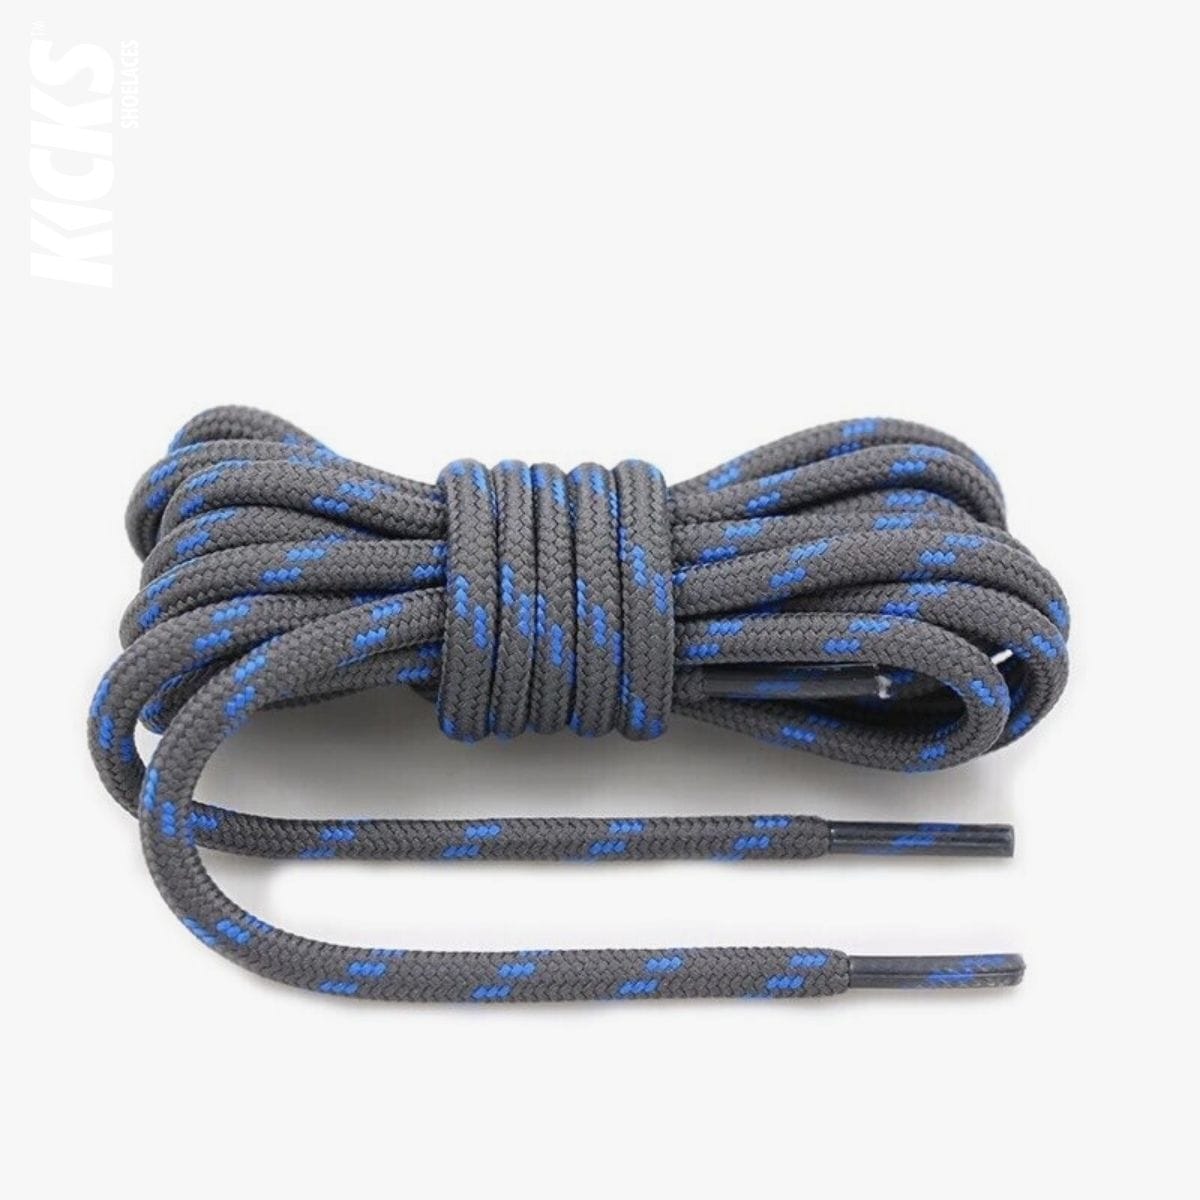 trekking-shoe-laces-united-states-in-grey-and-blue-shop-online